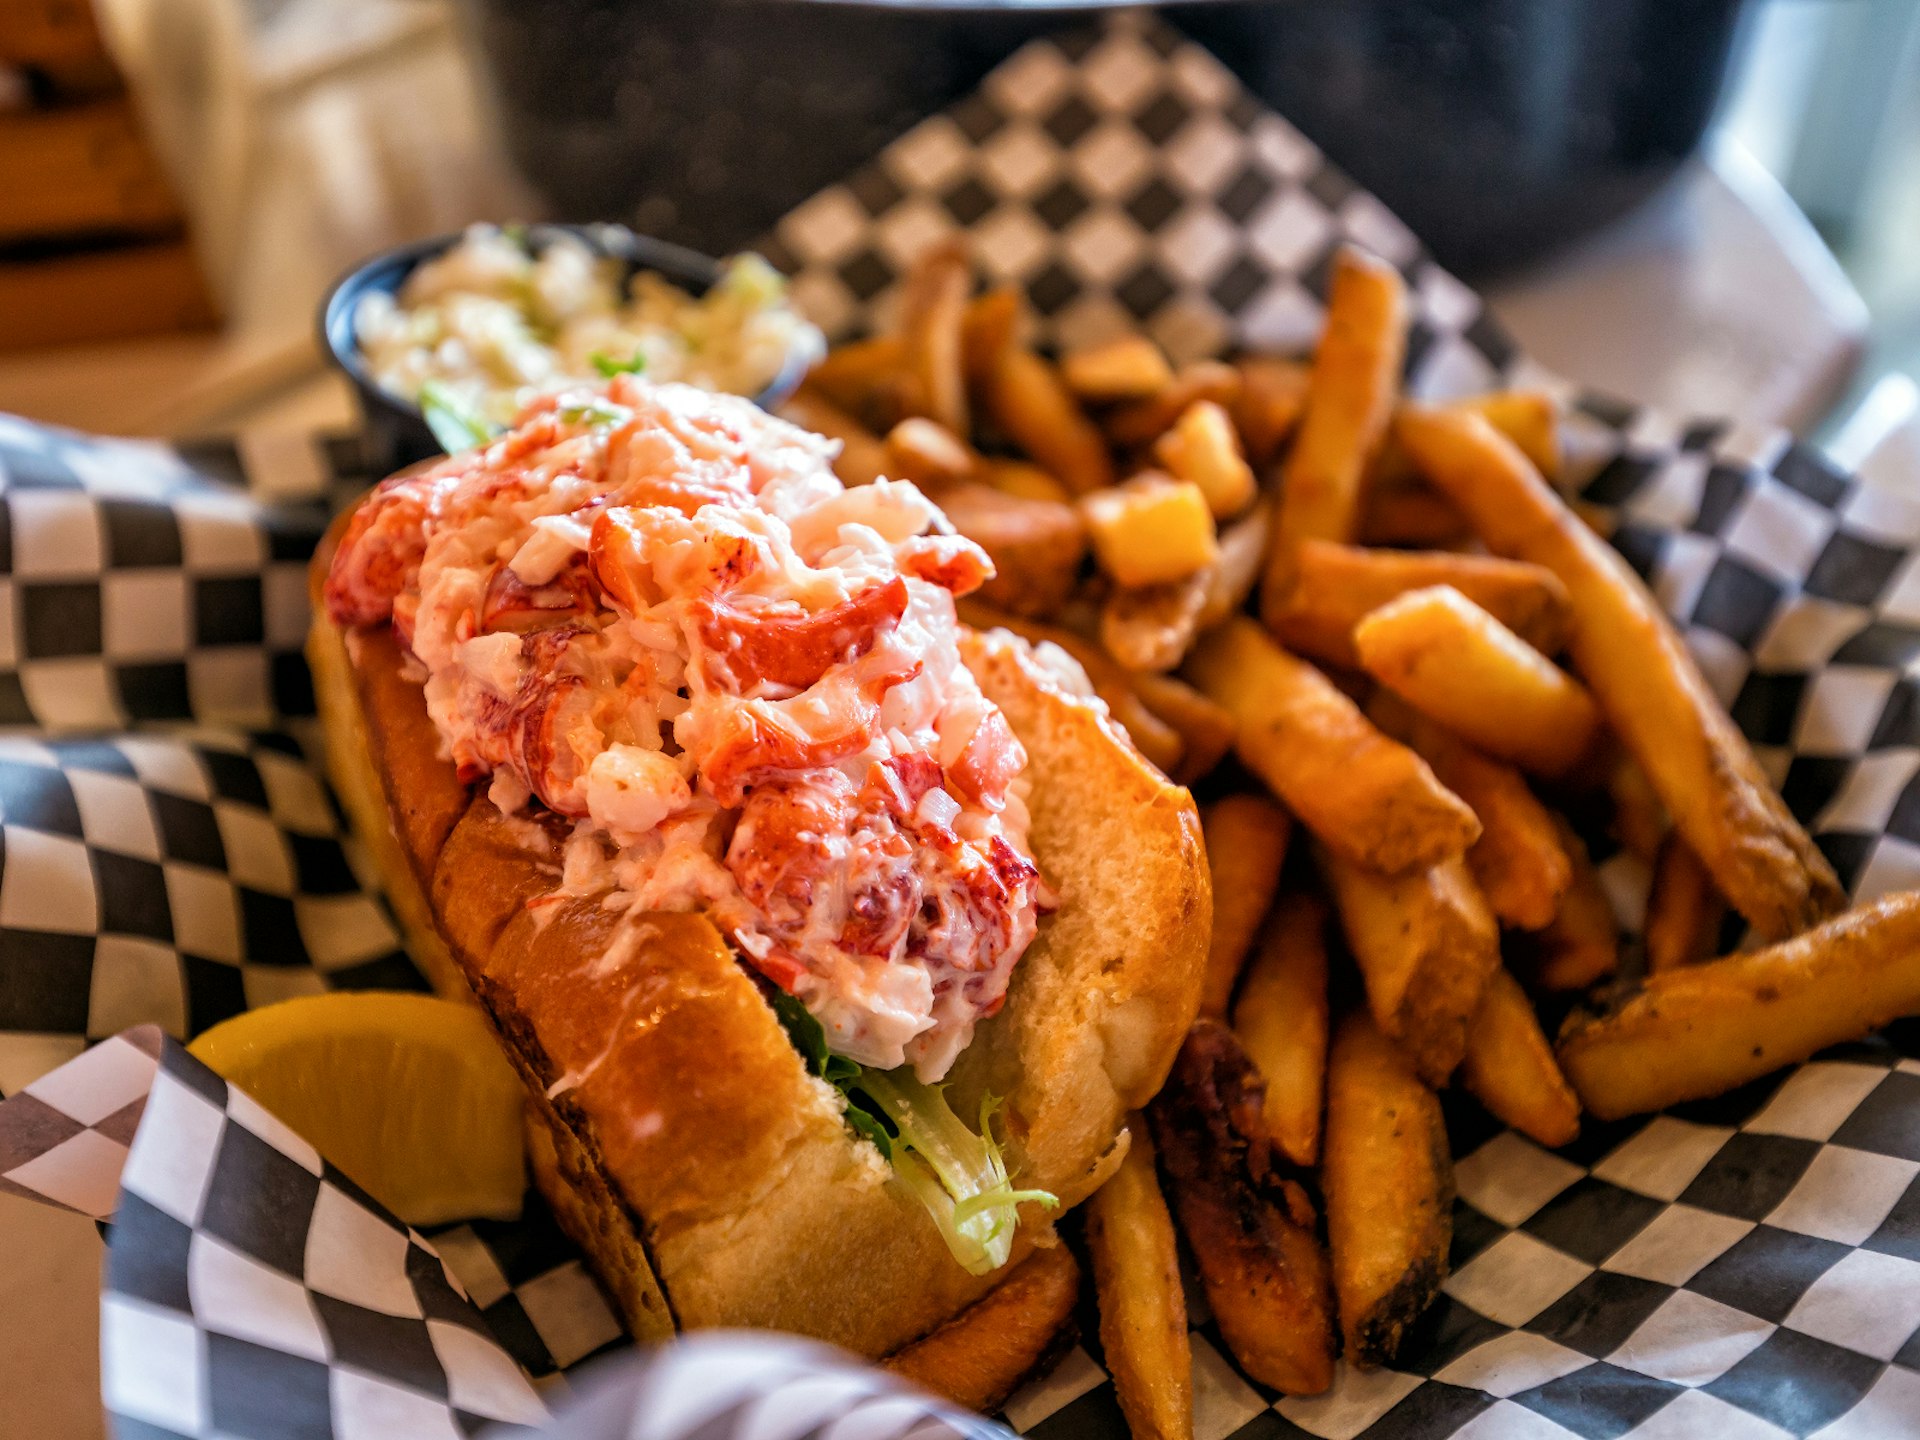 A Maine lobster roll in a basket with a side of fries